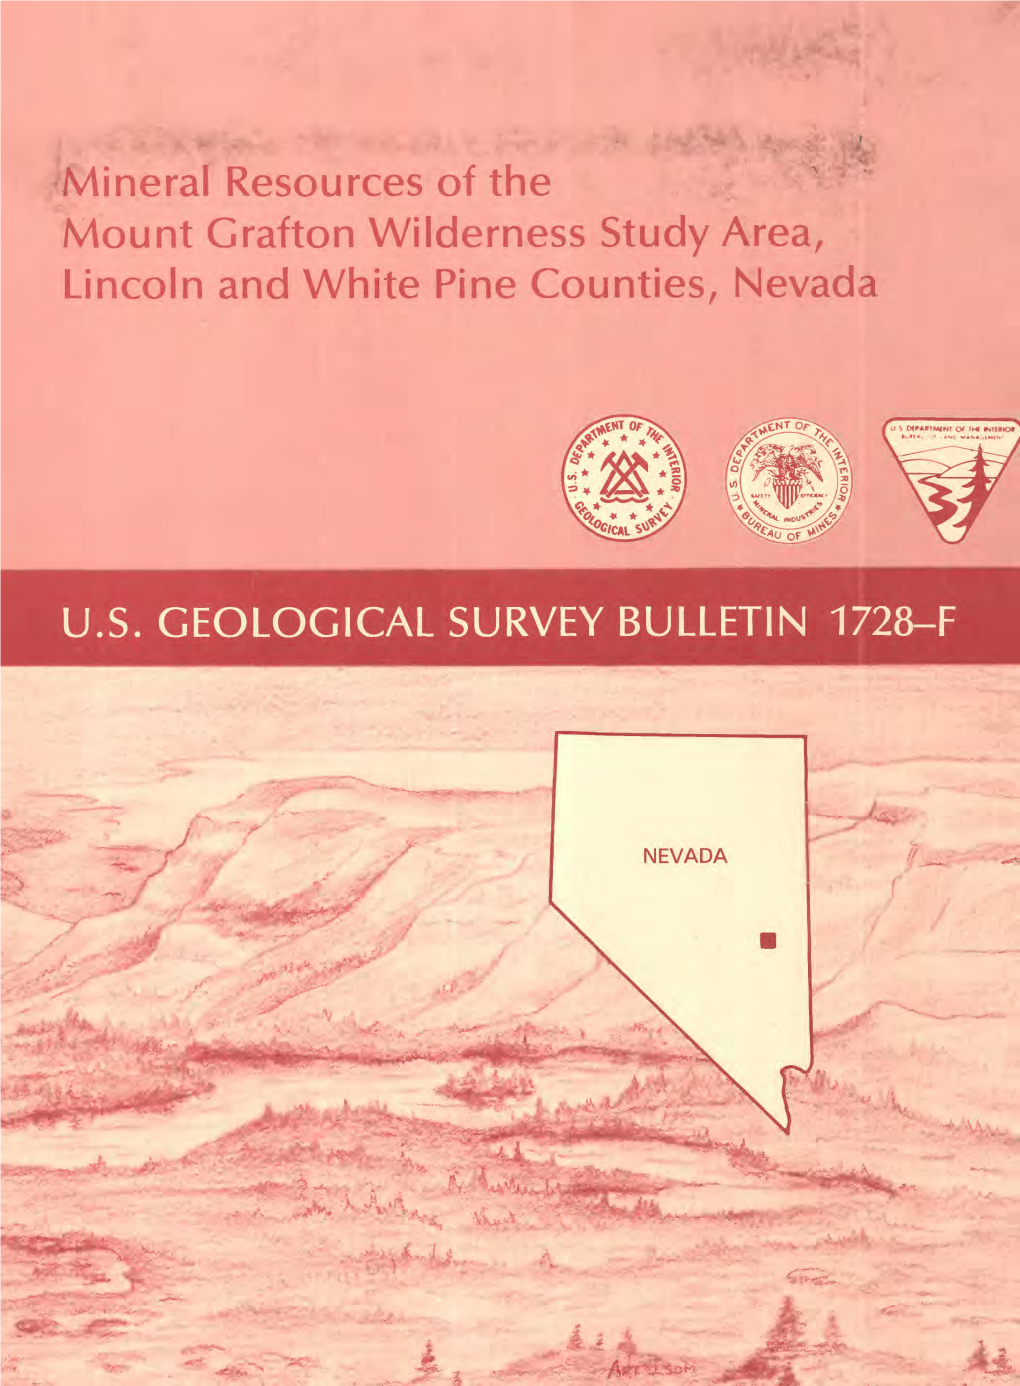 Mount Grafton Wilderness Study Area, Lincoln and White Pine Counties, Nevada